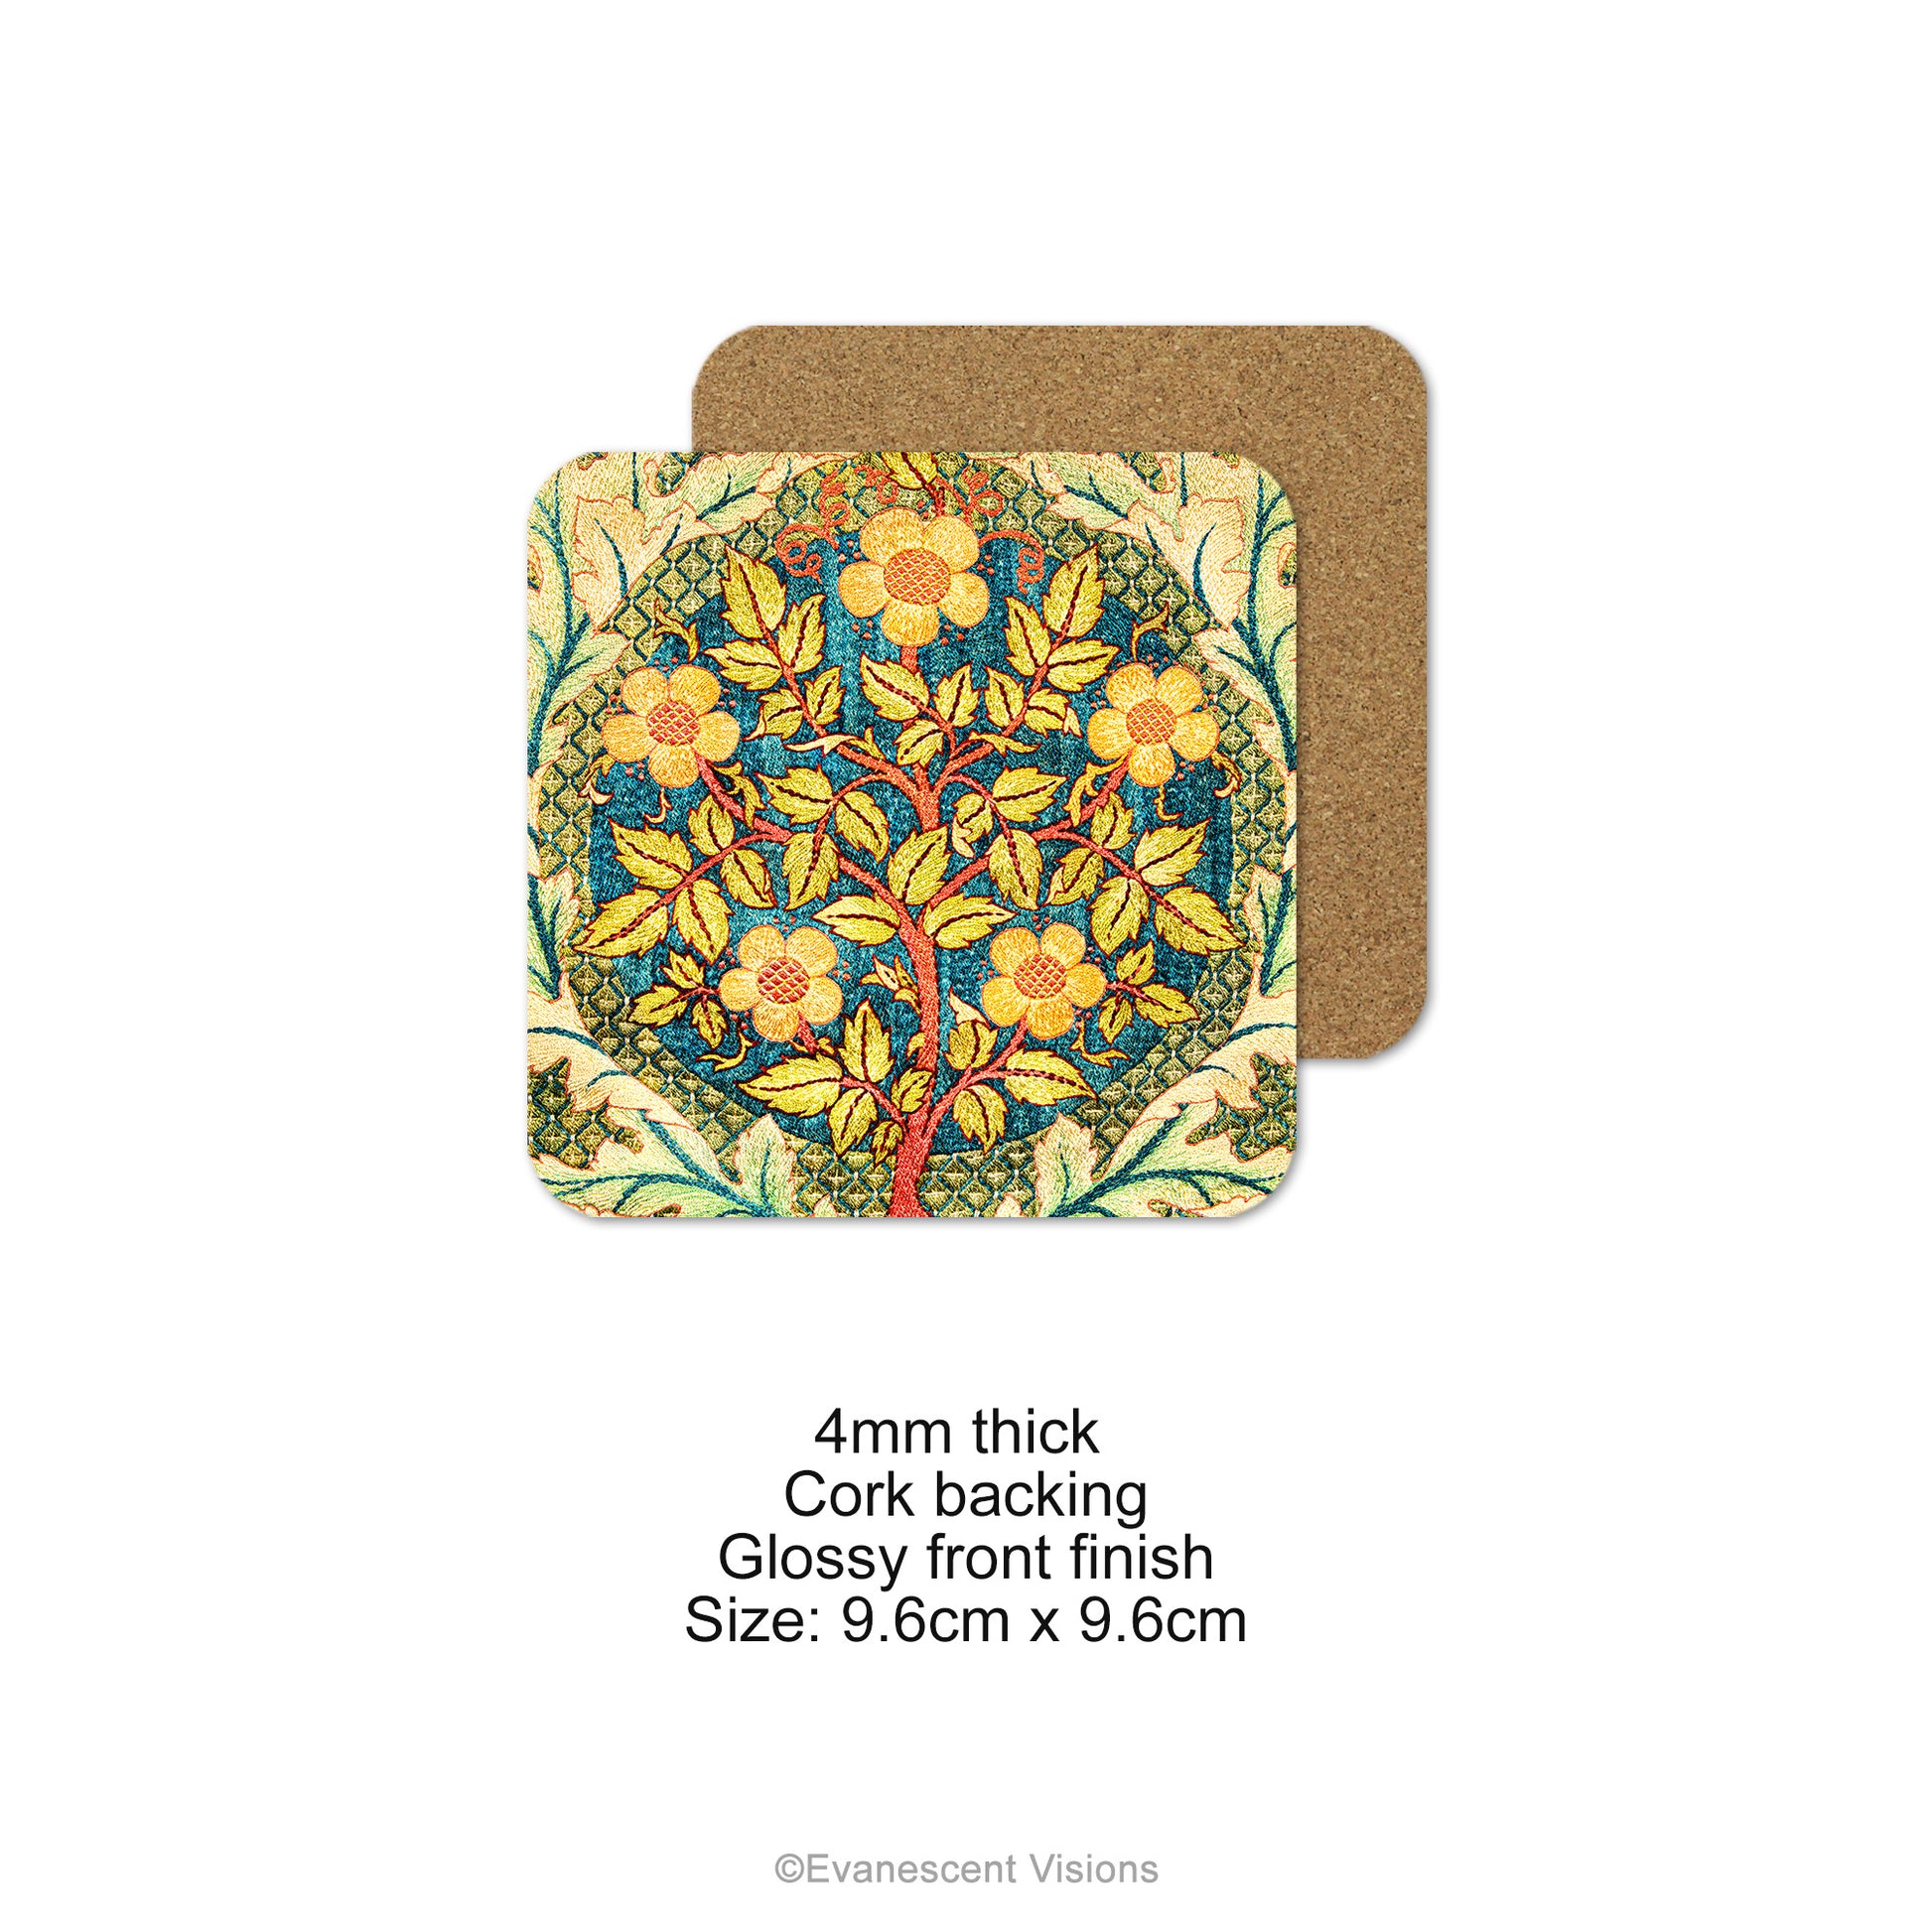 Product details for the William Morris Rose Wreath Drinks Coasters